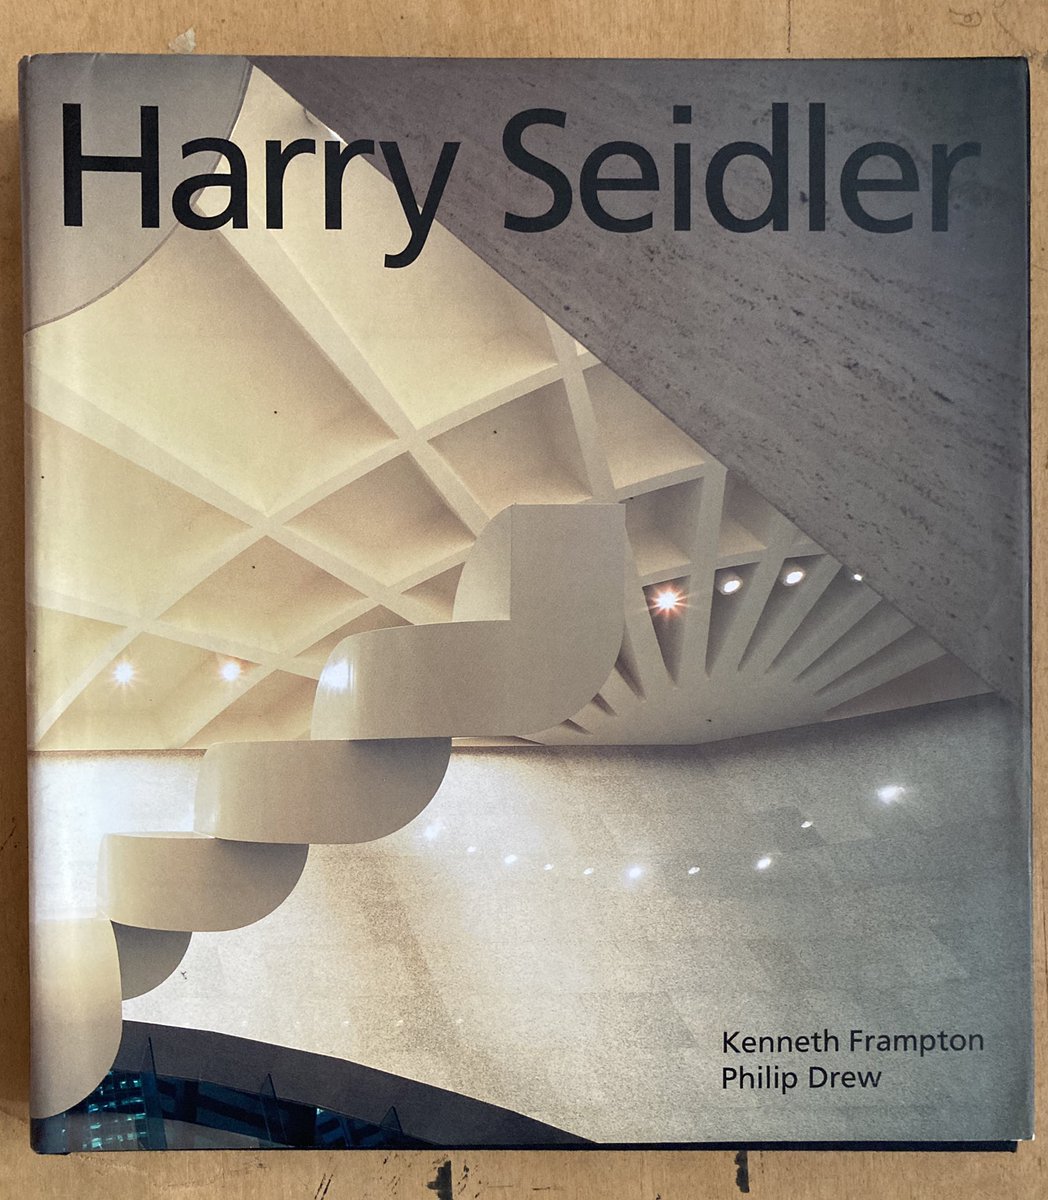 This great book is now listed on eBay - check it out - ebay.co.uk/itm/2936594678… 
#architecturebook #book #harryseidler